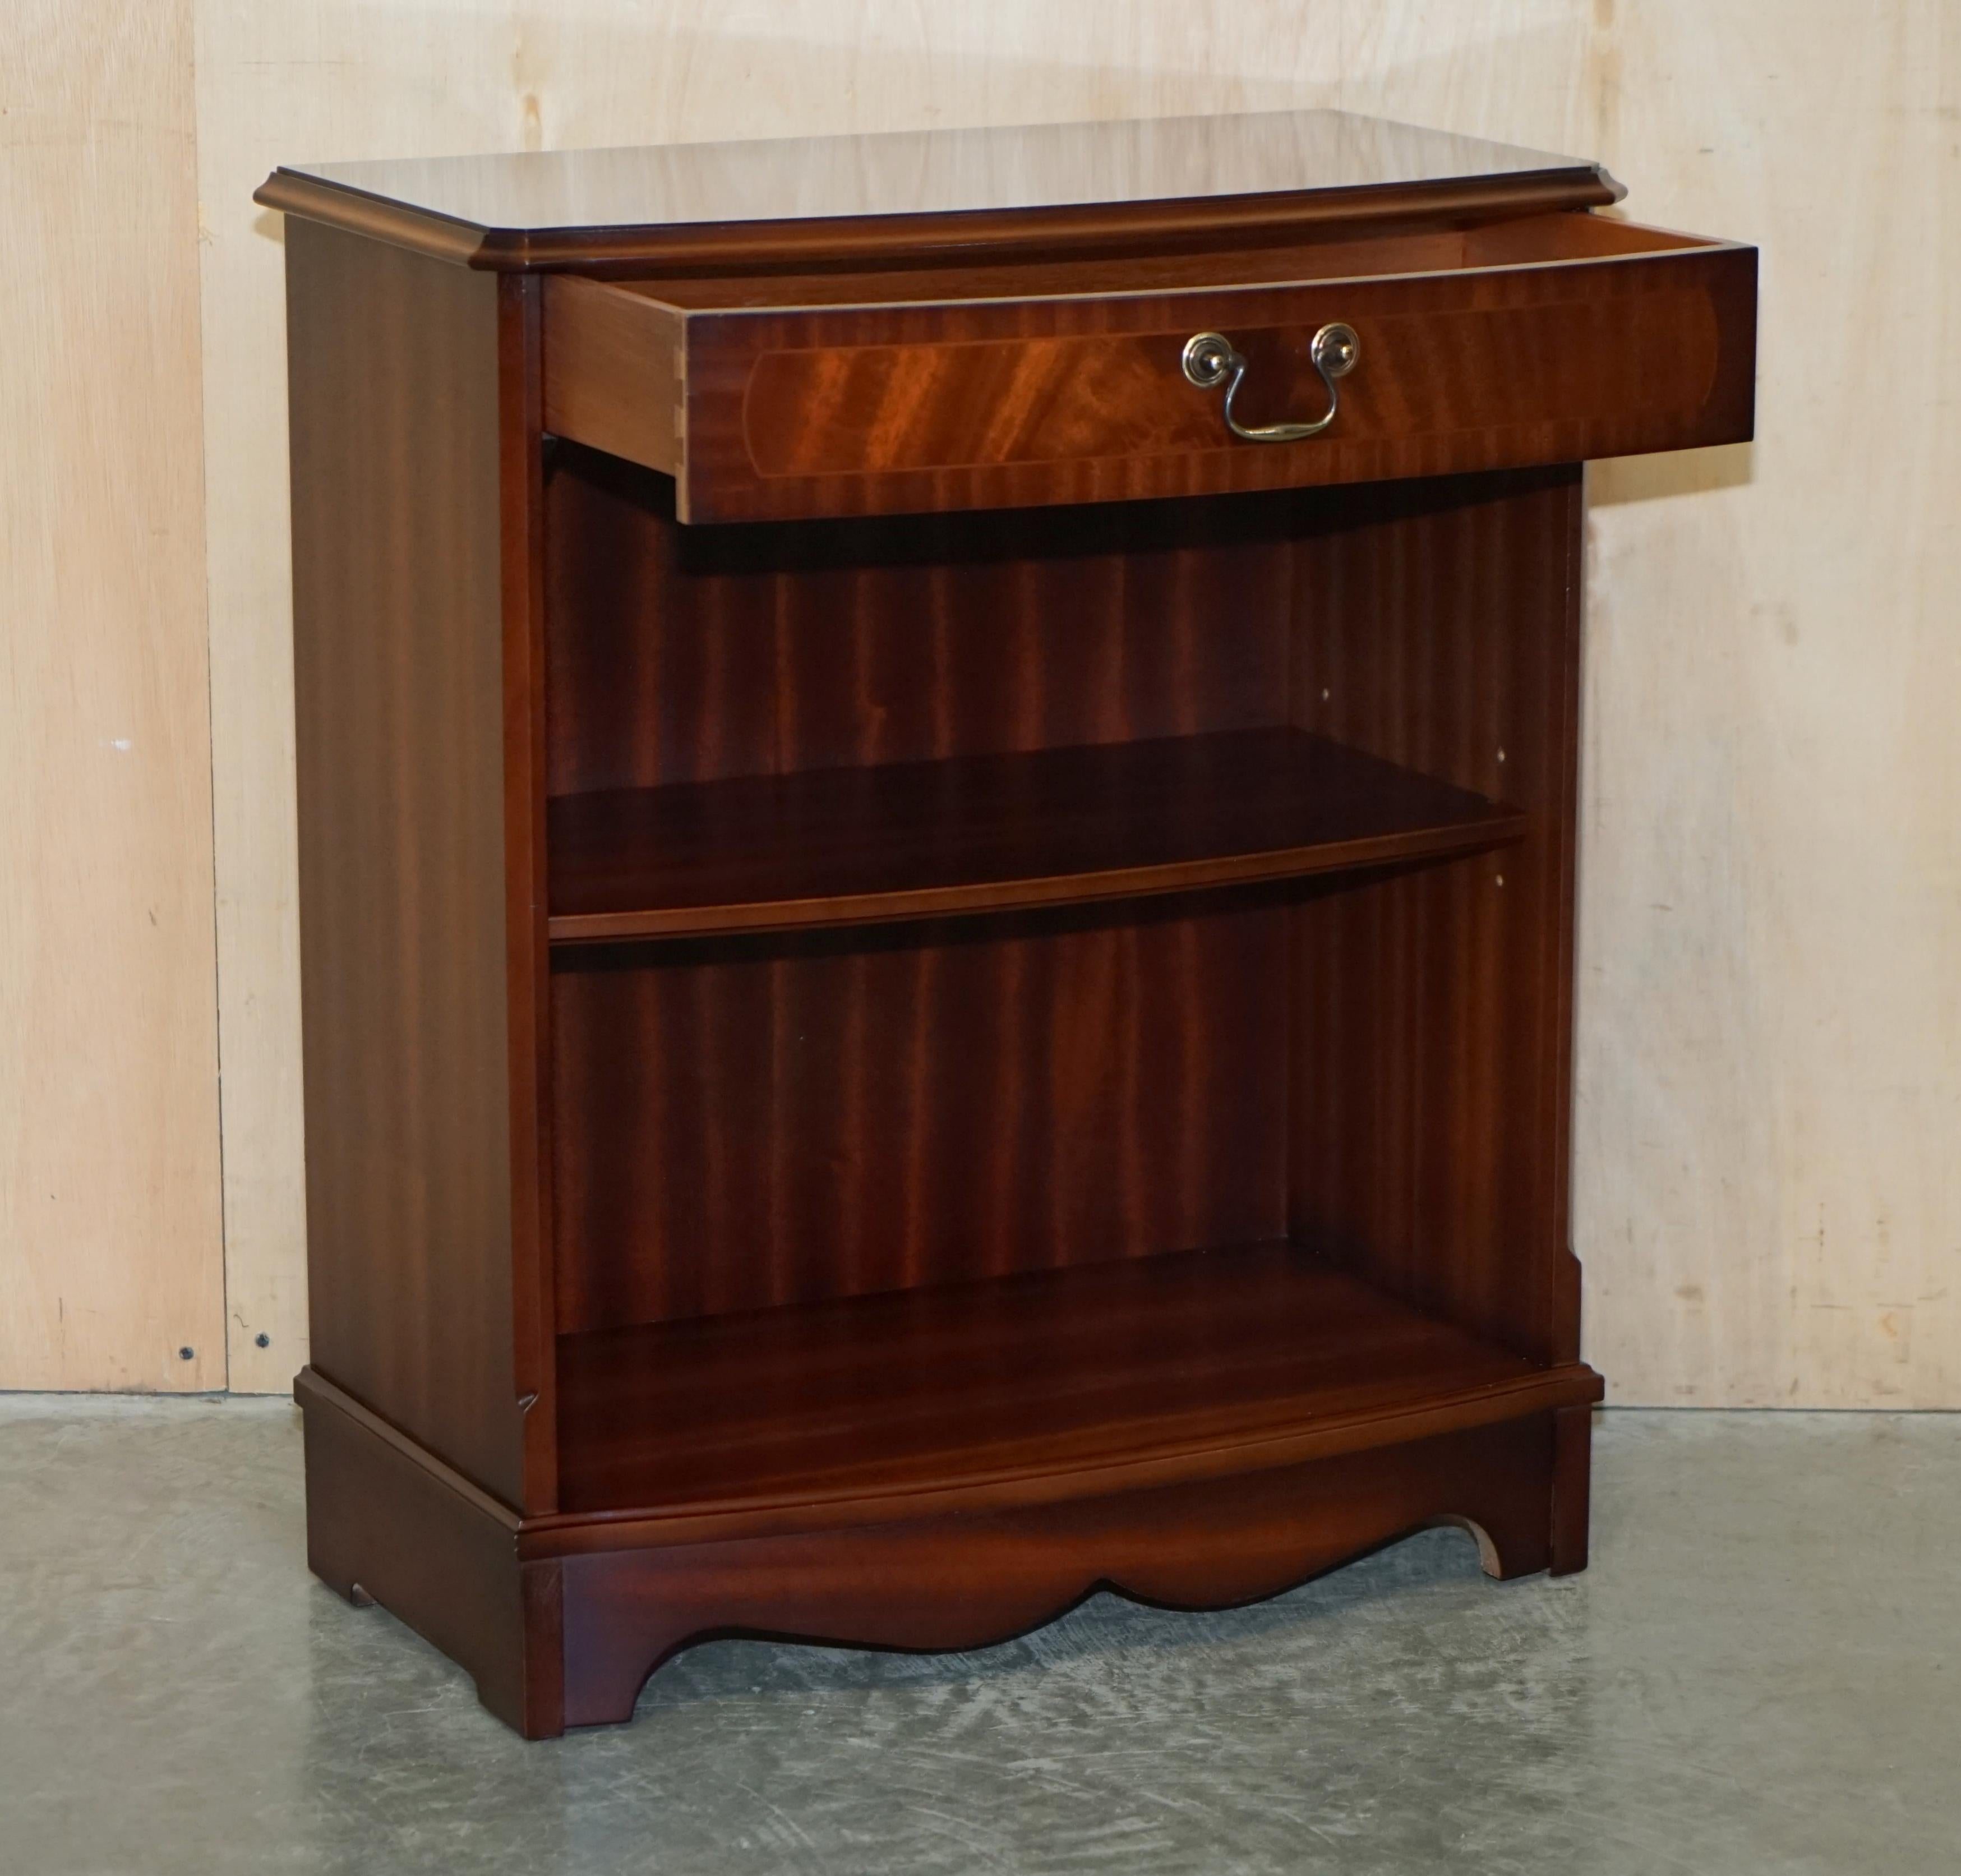 LOVELY FLAMED HARDWOOD BOW FRONTED DWARF OPEN LiBRARY BOOKCASE SINGLE DRAWER im Angebot 9